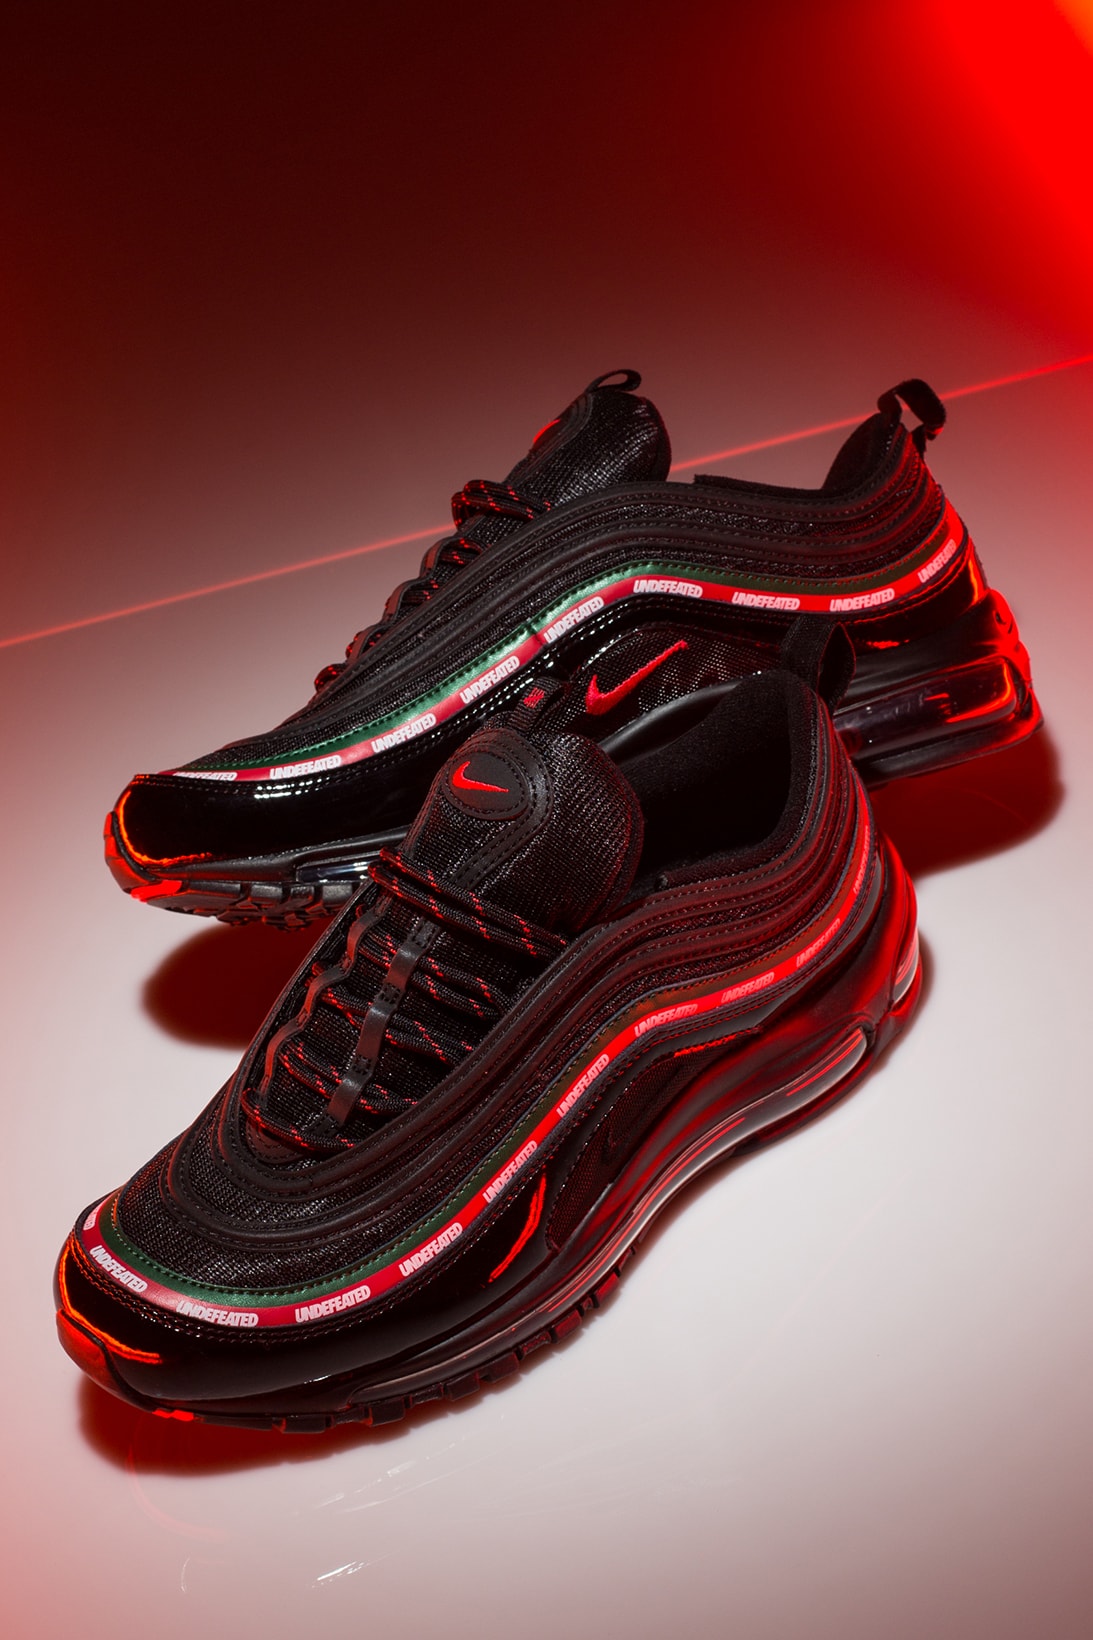 UNDEFEATED Nike Air Max 97 Matching Apparel Hoodie Sweatshirt T Shirt Tee Bag Socks 2017 September 15 Release Date Info Sneakers Shoes Footwear gucci red green white black